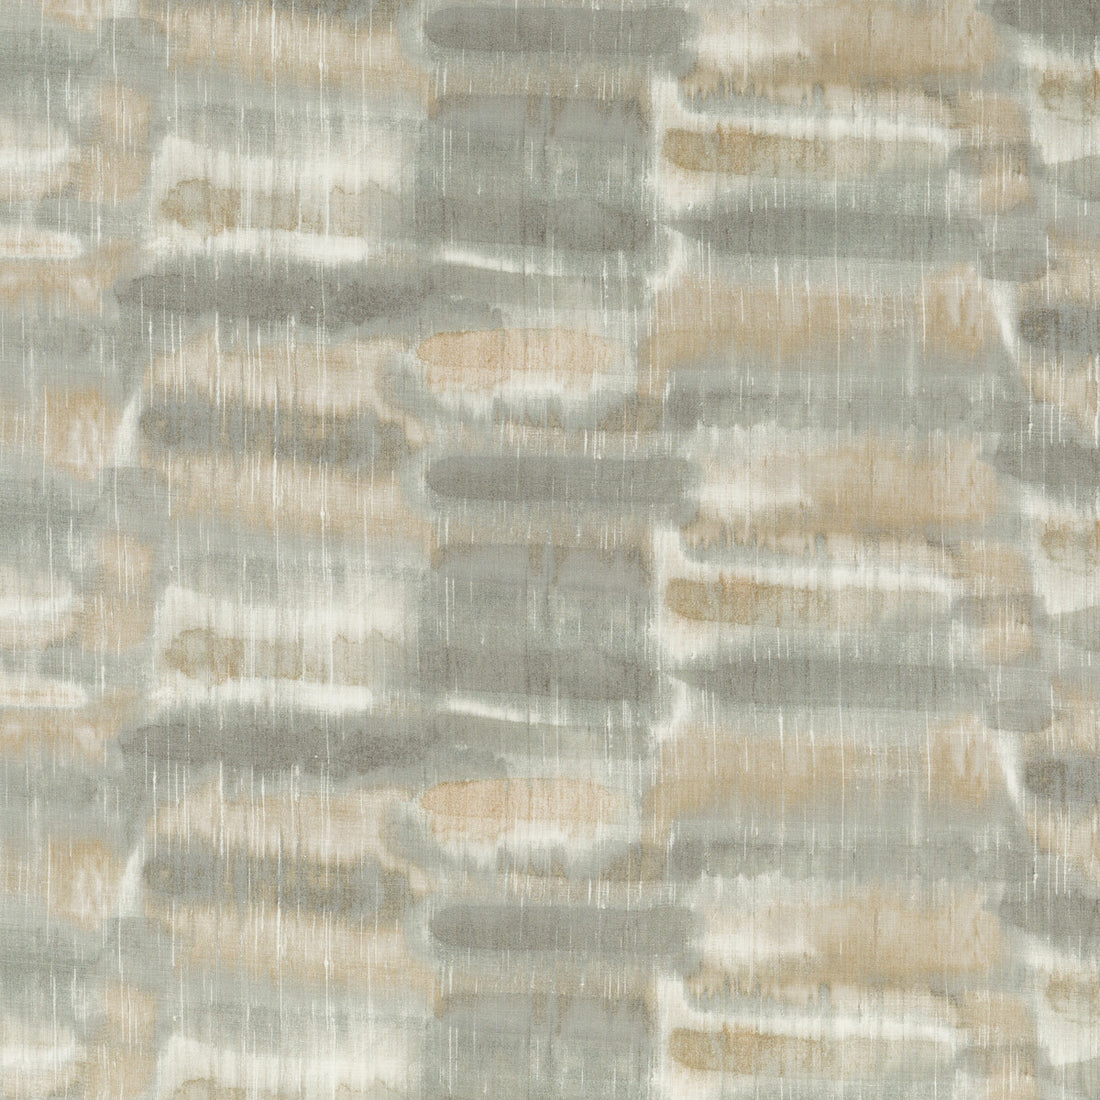 Sarabi fabric in linen color - pattern ED75039.3.0 - by Threads in the Nala Prints collection